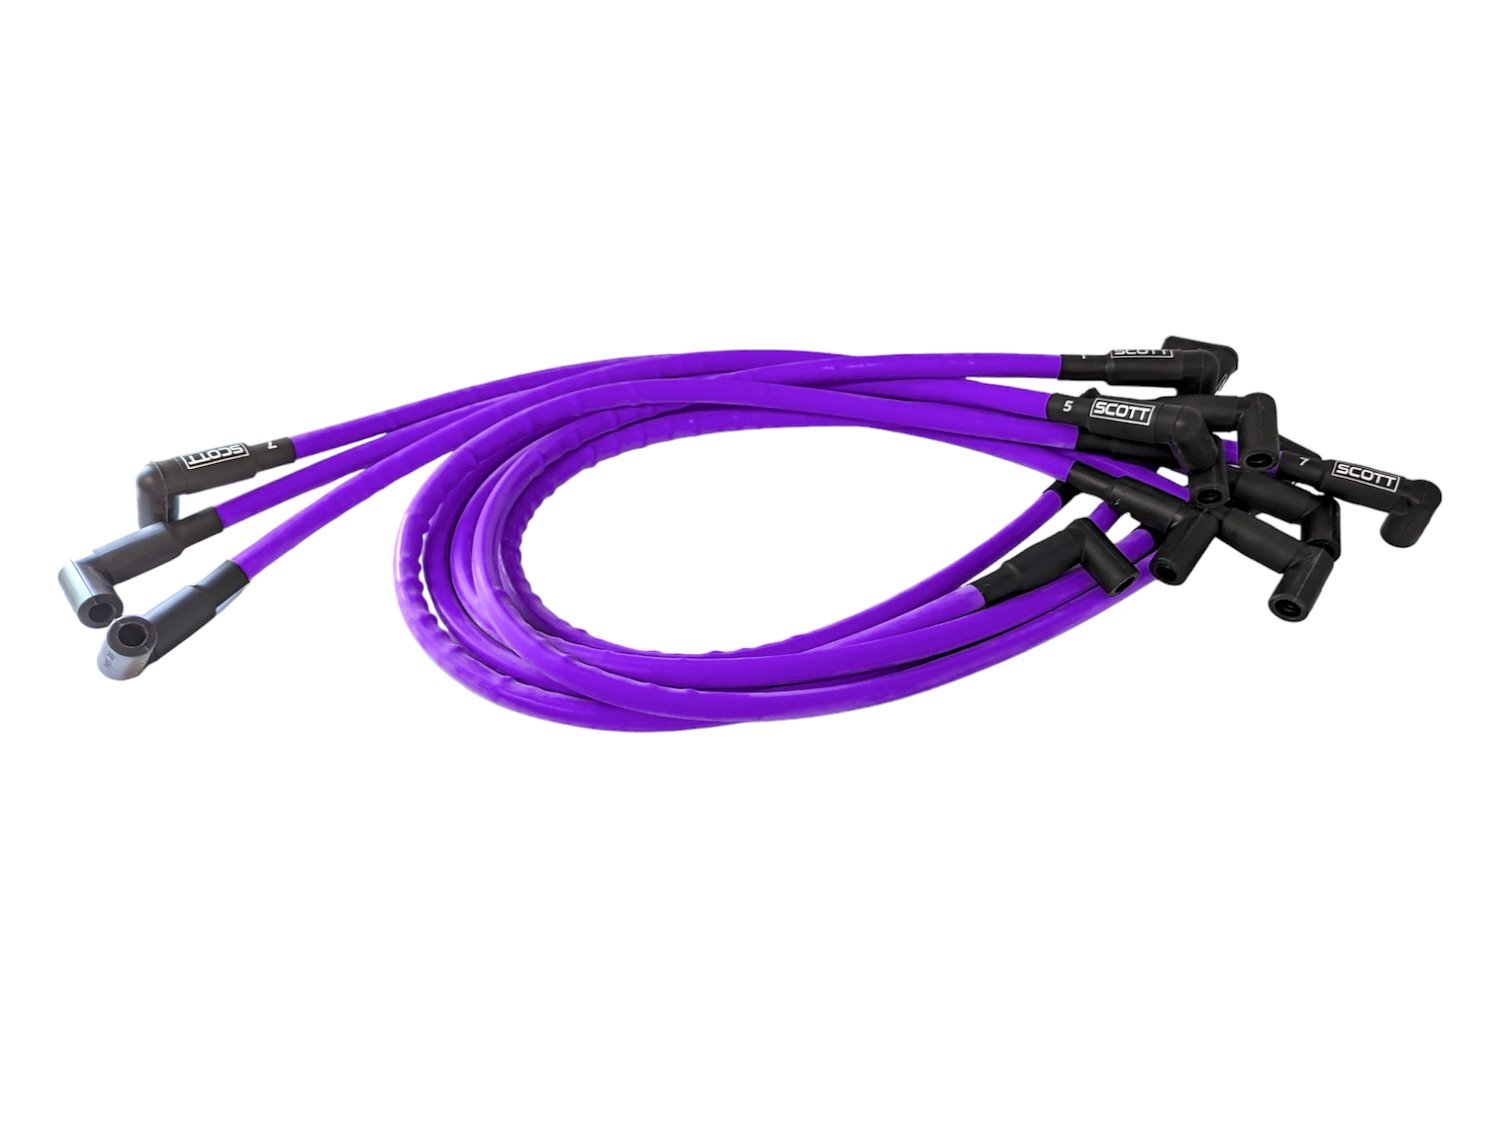 SPW300-CH-402-6 Super Mag Fiberglass-Oversleeved Spark Plug Wire Set for Small Block Chevy, Over Valve Cover [Purple]